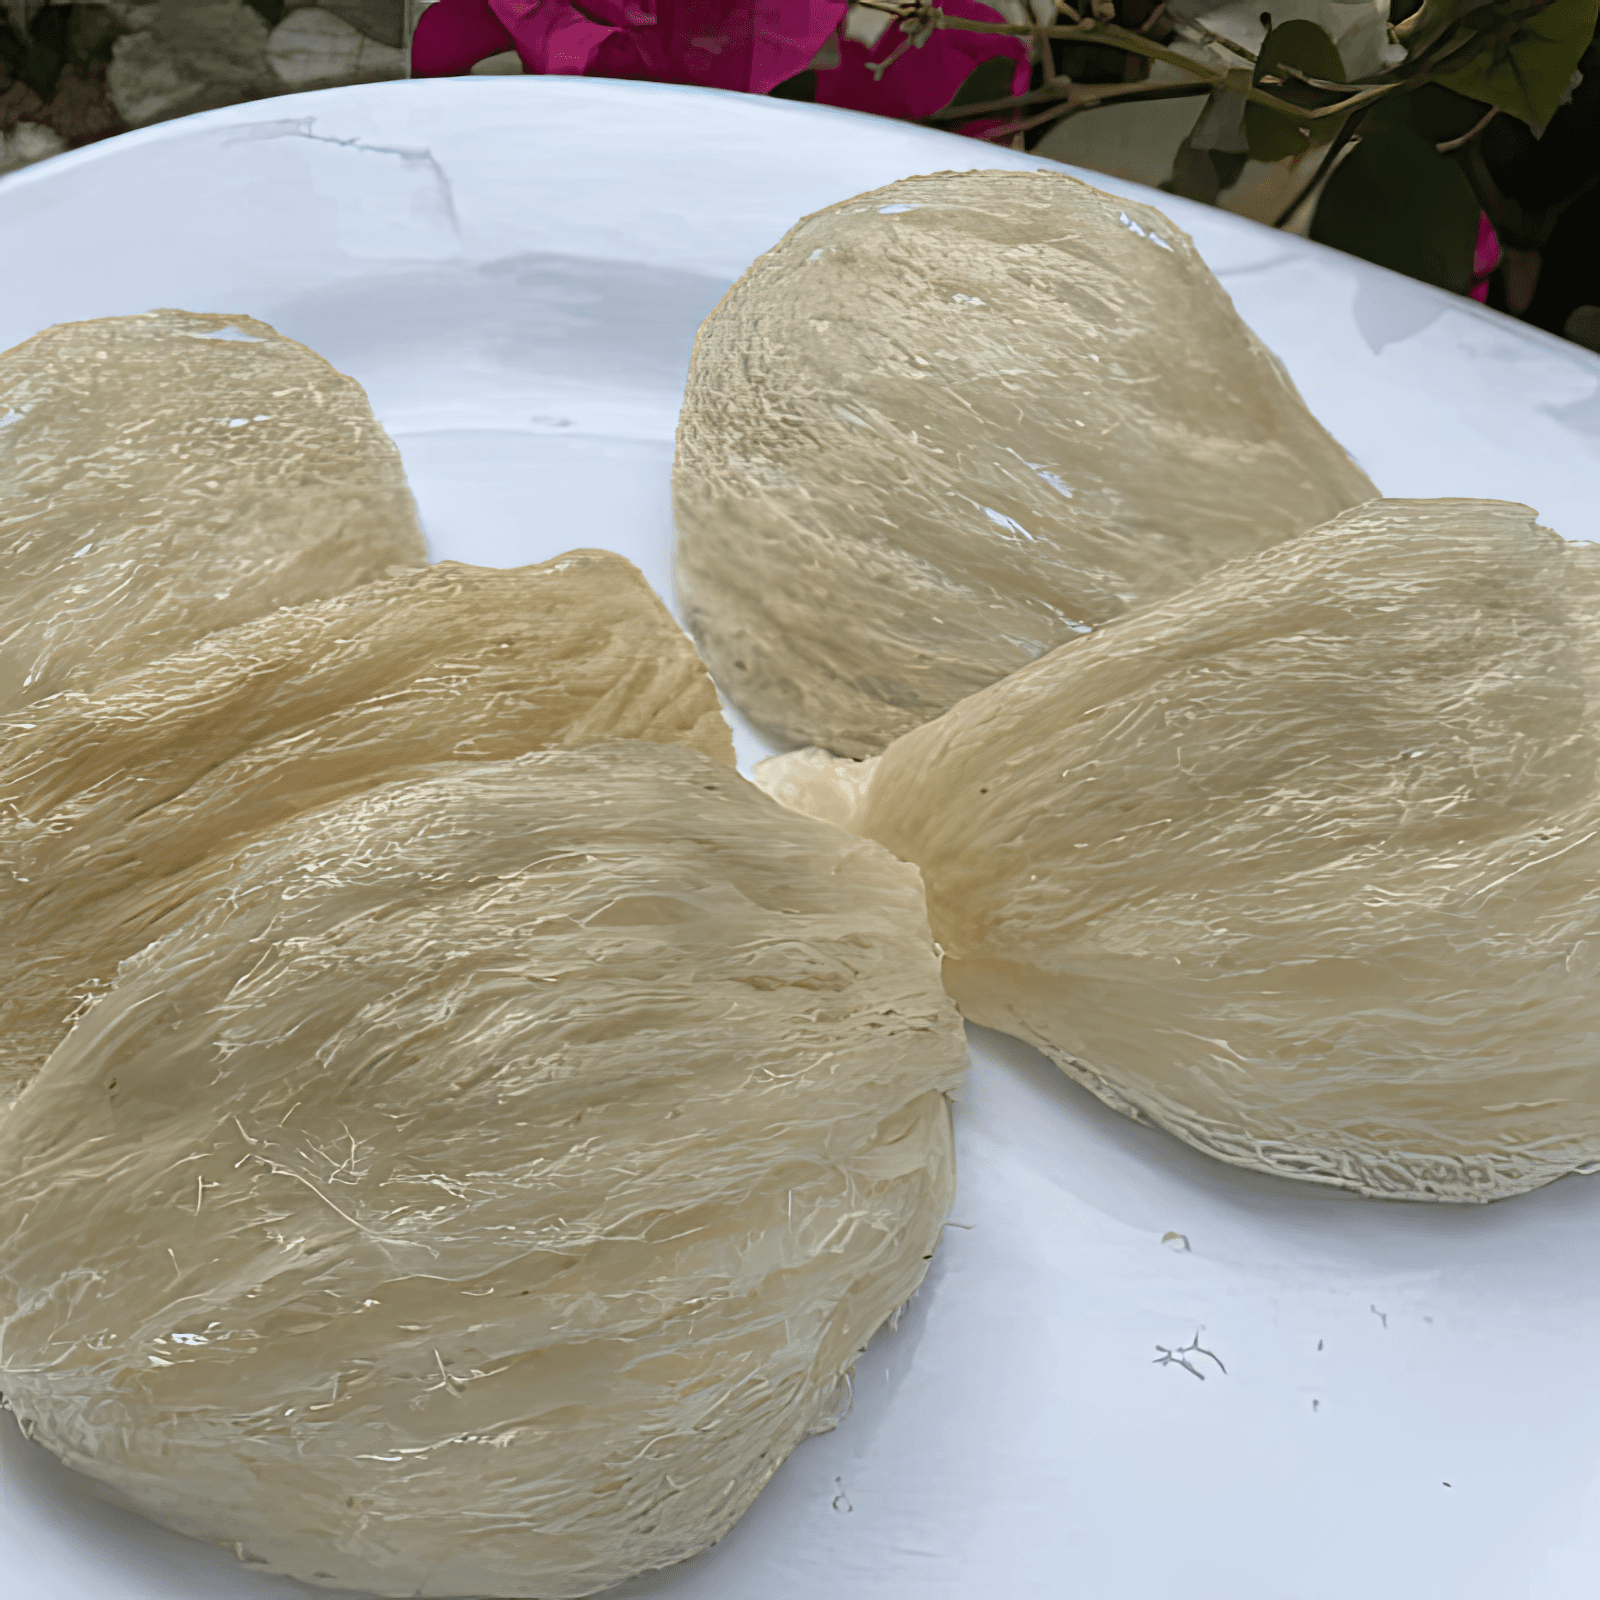 Cleaned bird nests laying on a plate